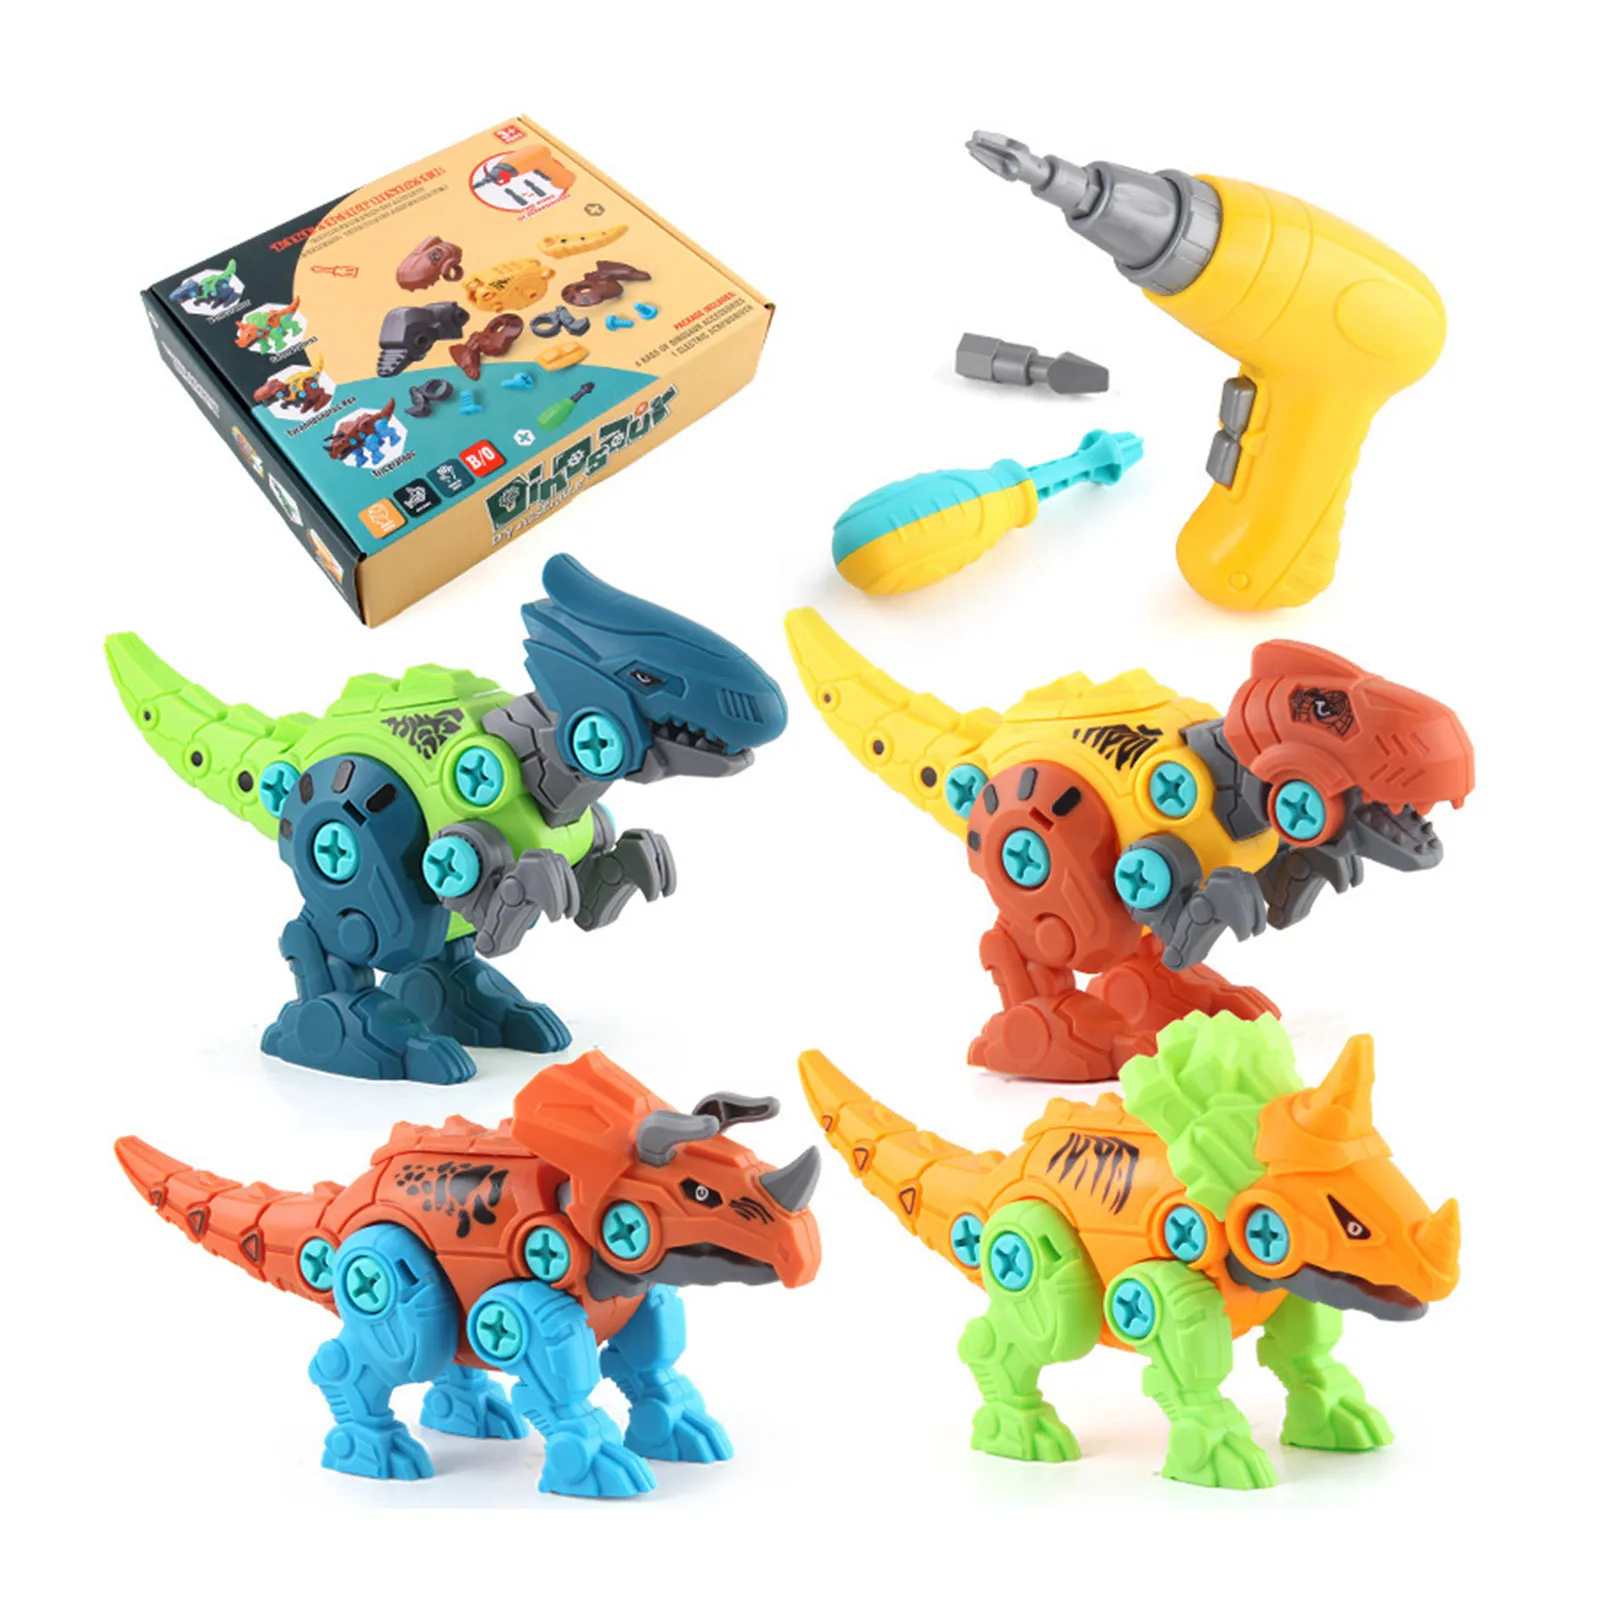 

Dino Toy Take Apart Dinosaur Toy Nut Splicing Dinosaur DIY Construction Set With Electric Drill For 5-7 Years Old Kids Christmas